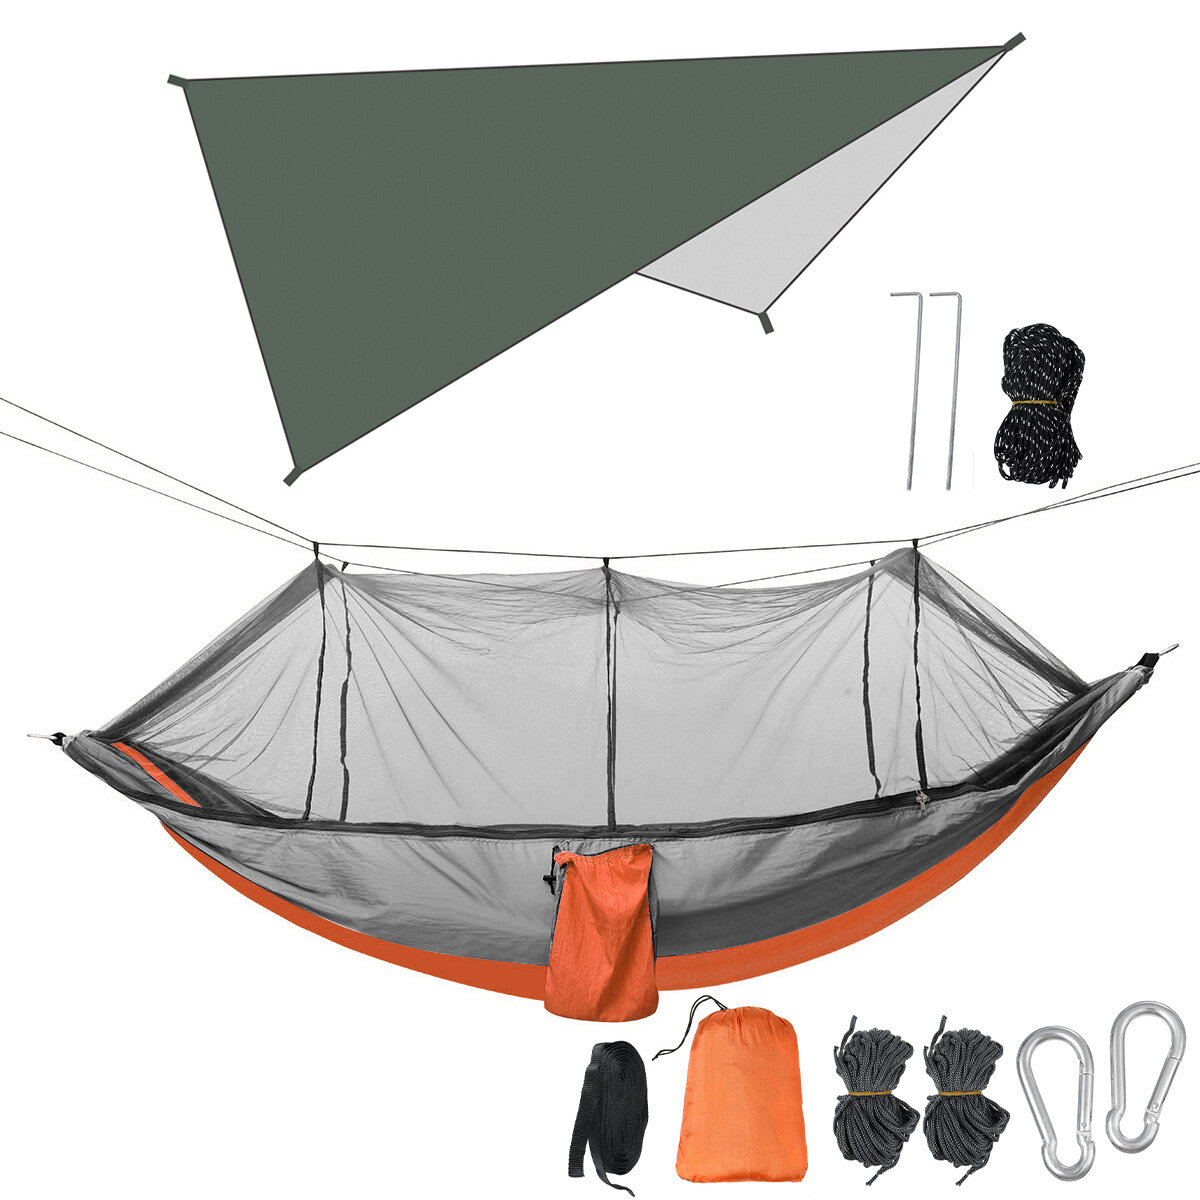 Double Person Camping Hammock with Mosquito Net + Awning Outdoor Hiking Travel Hanging Hammock Set B